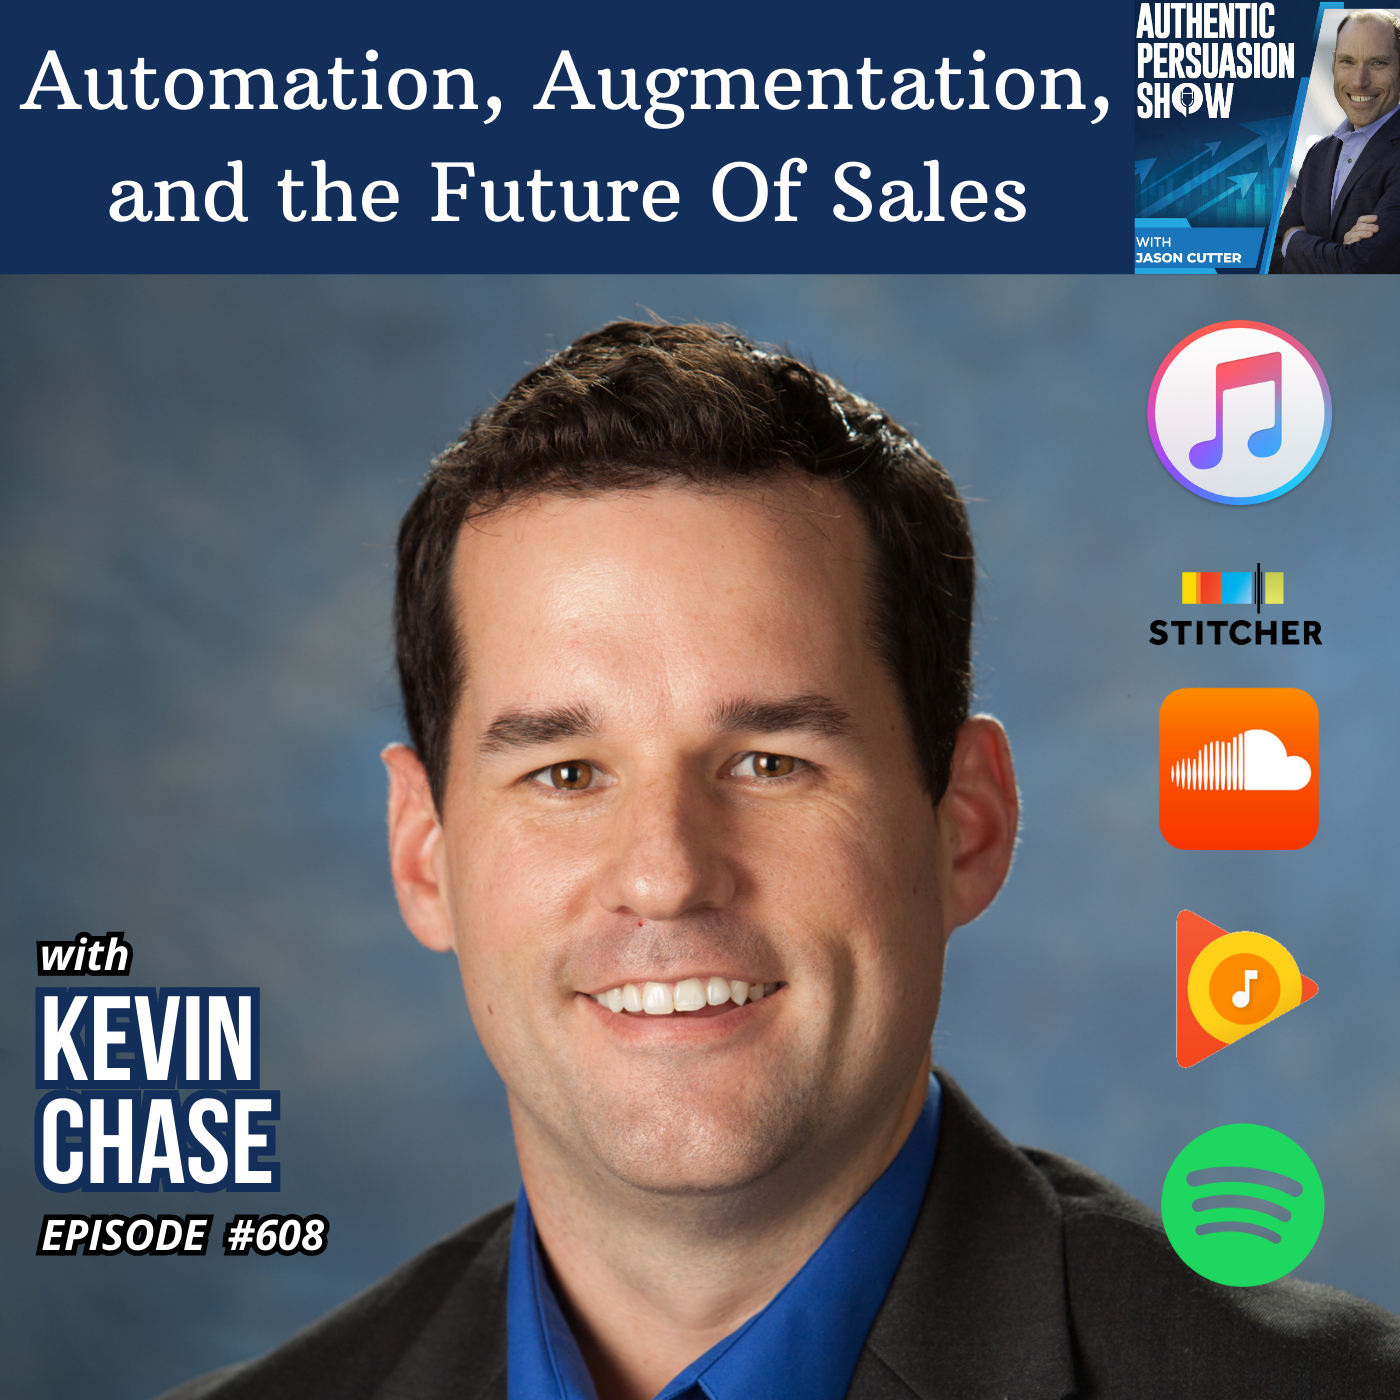 [608] Automation, Augmentation, and the Future Of Sales, with Dr. Kevin Chase from Washington State University